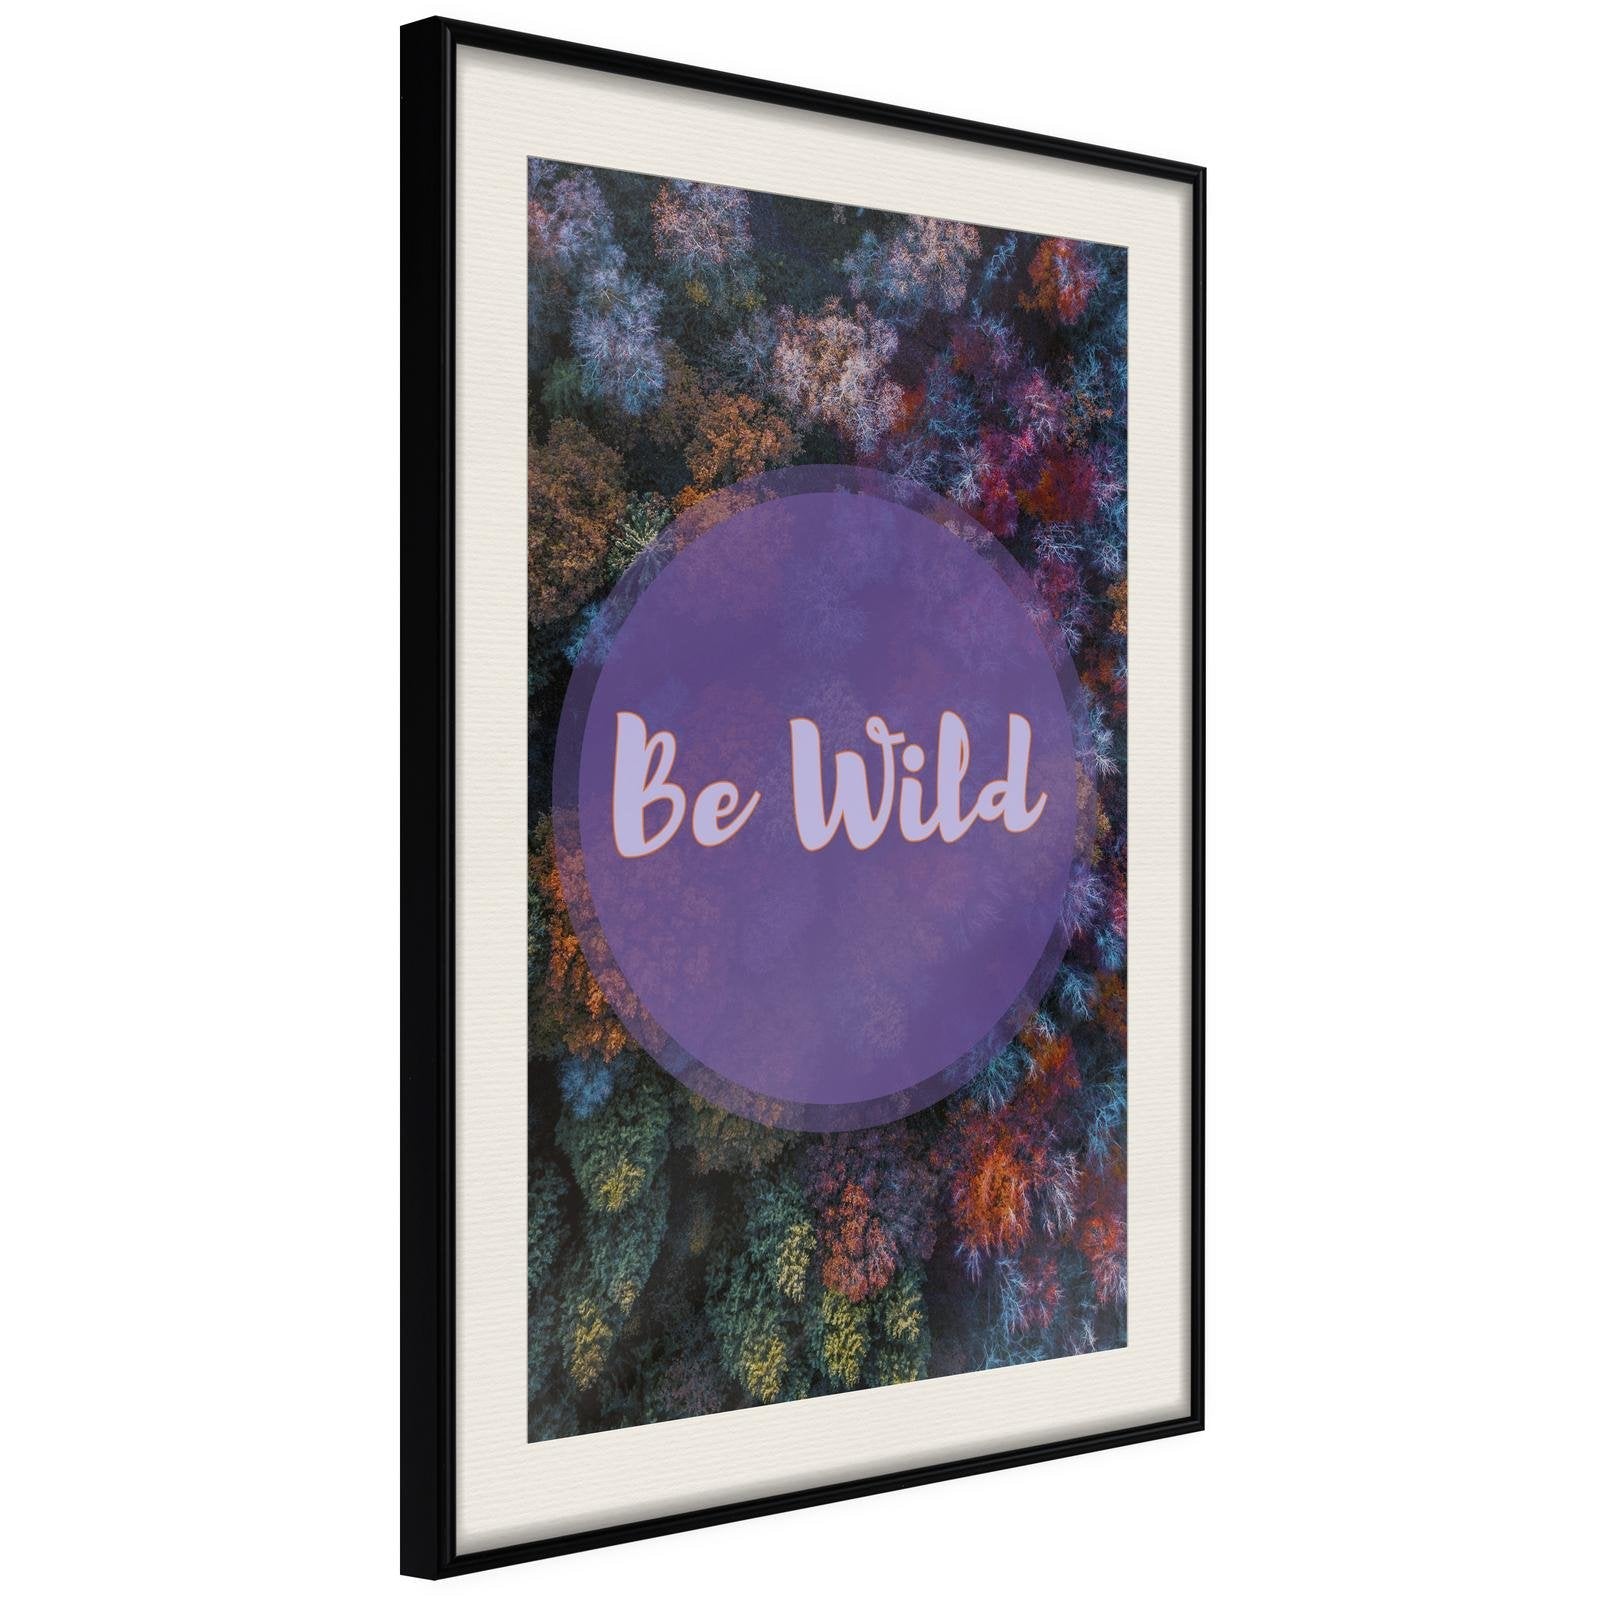 Inramad Poster / Tavla - Find Wildness in Yourself-Poster Inramad-Artgeist-20x30-Svart ram med passepartout-peaceofhome.se